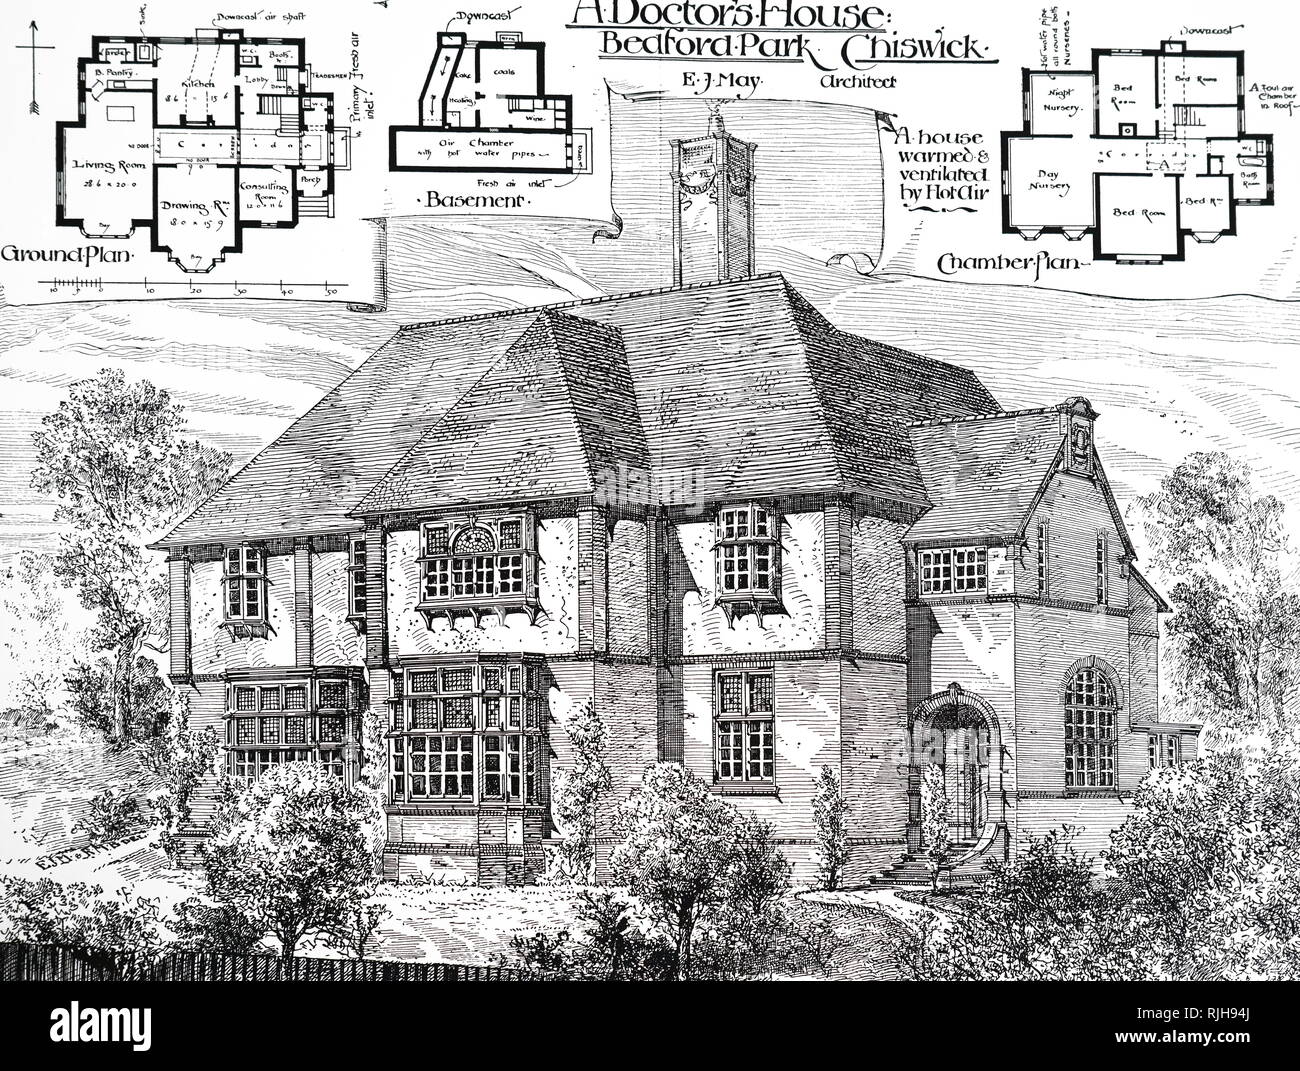 An engraving depicting a view of a house built by Edward John May, for Dr Hogg, which was heated and ventilated by hot air. Fresh air was drawn in through the basement, and hot pipes were used to heat the house through gratings in the floors downstairs and by vents in the upstairs rooms. The flume for the kitchen chimney provided heat to create a draught for extracting exhausted air. Edward John May (1853-1941) an English architect. Dated 19th century Stock Photo